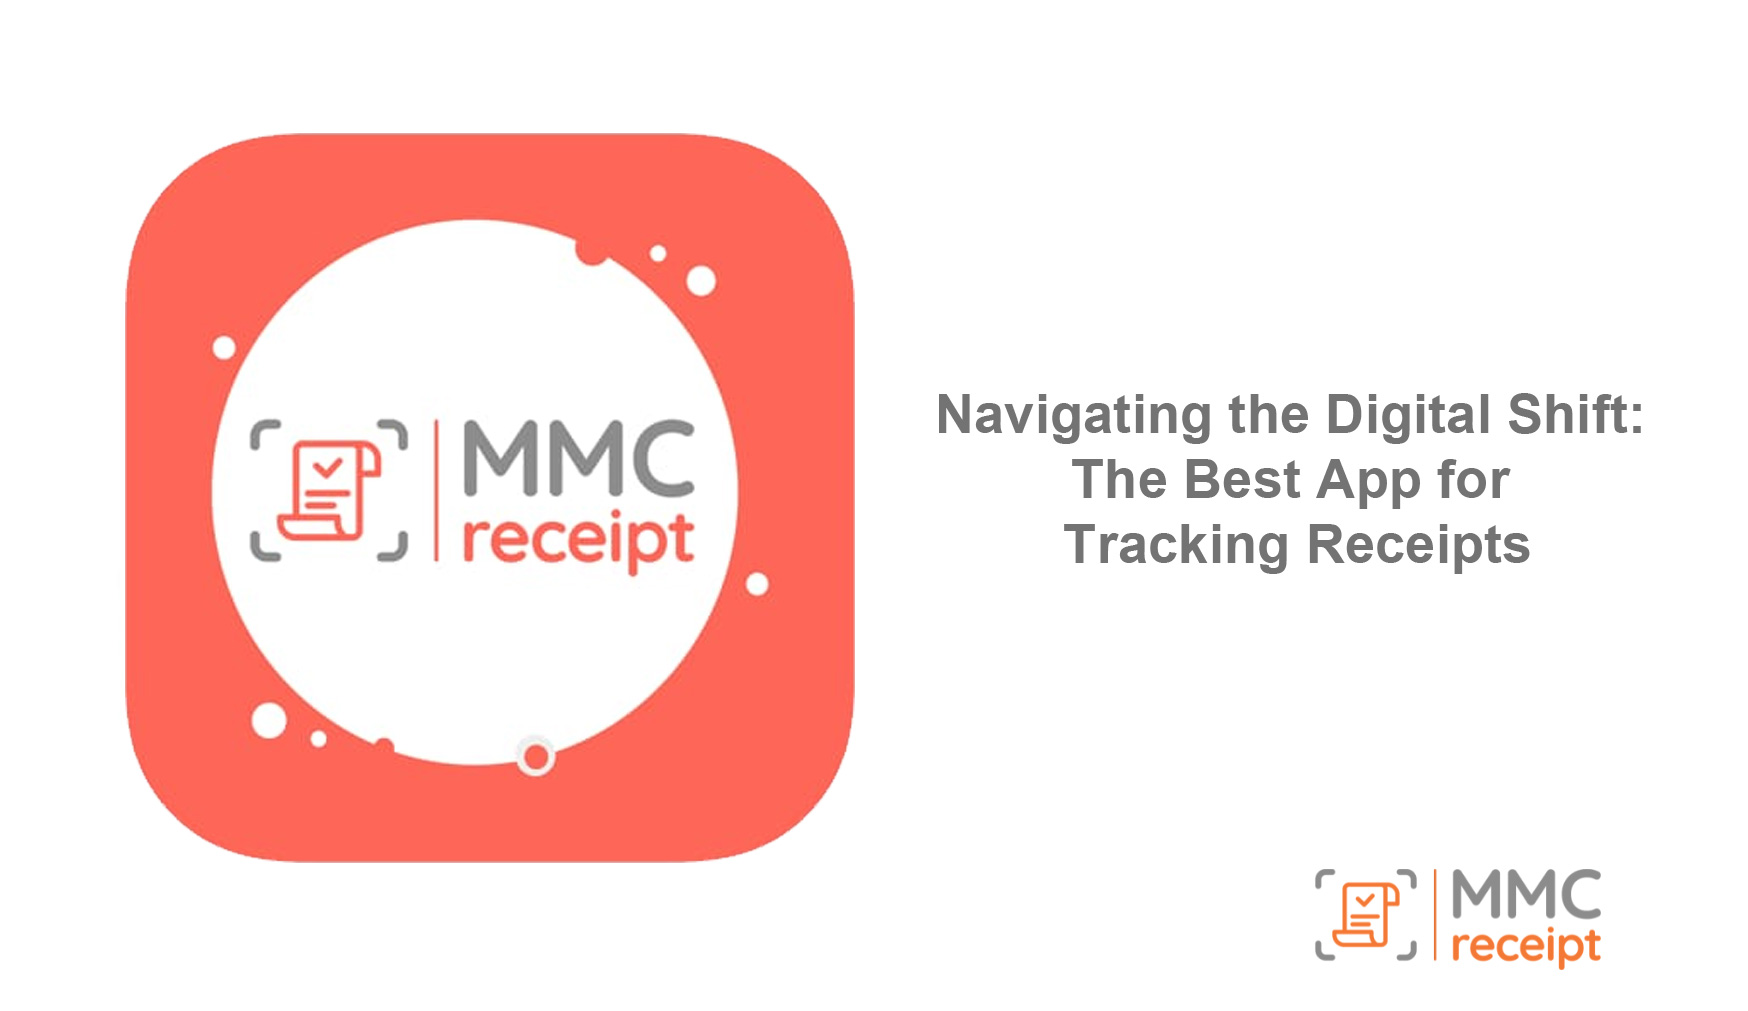 Navigating the Digital Shift: The Best App for Tracking Receipts